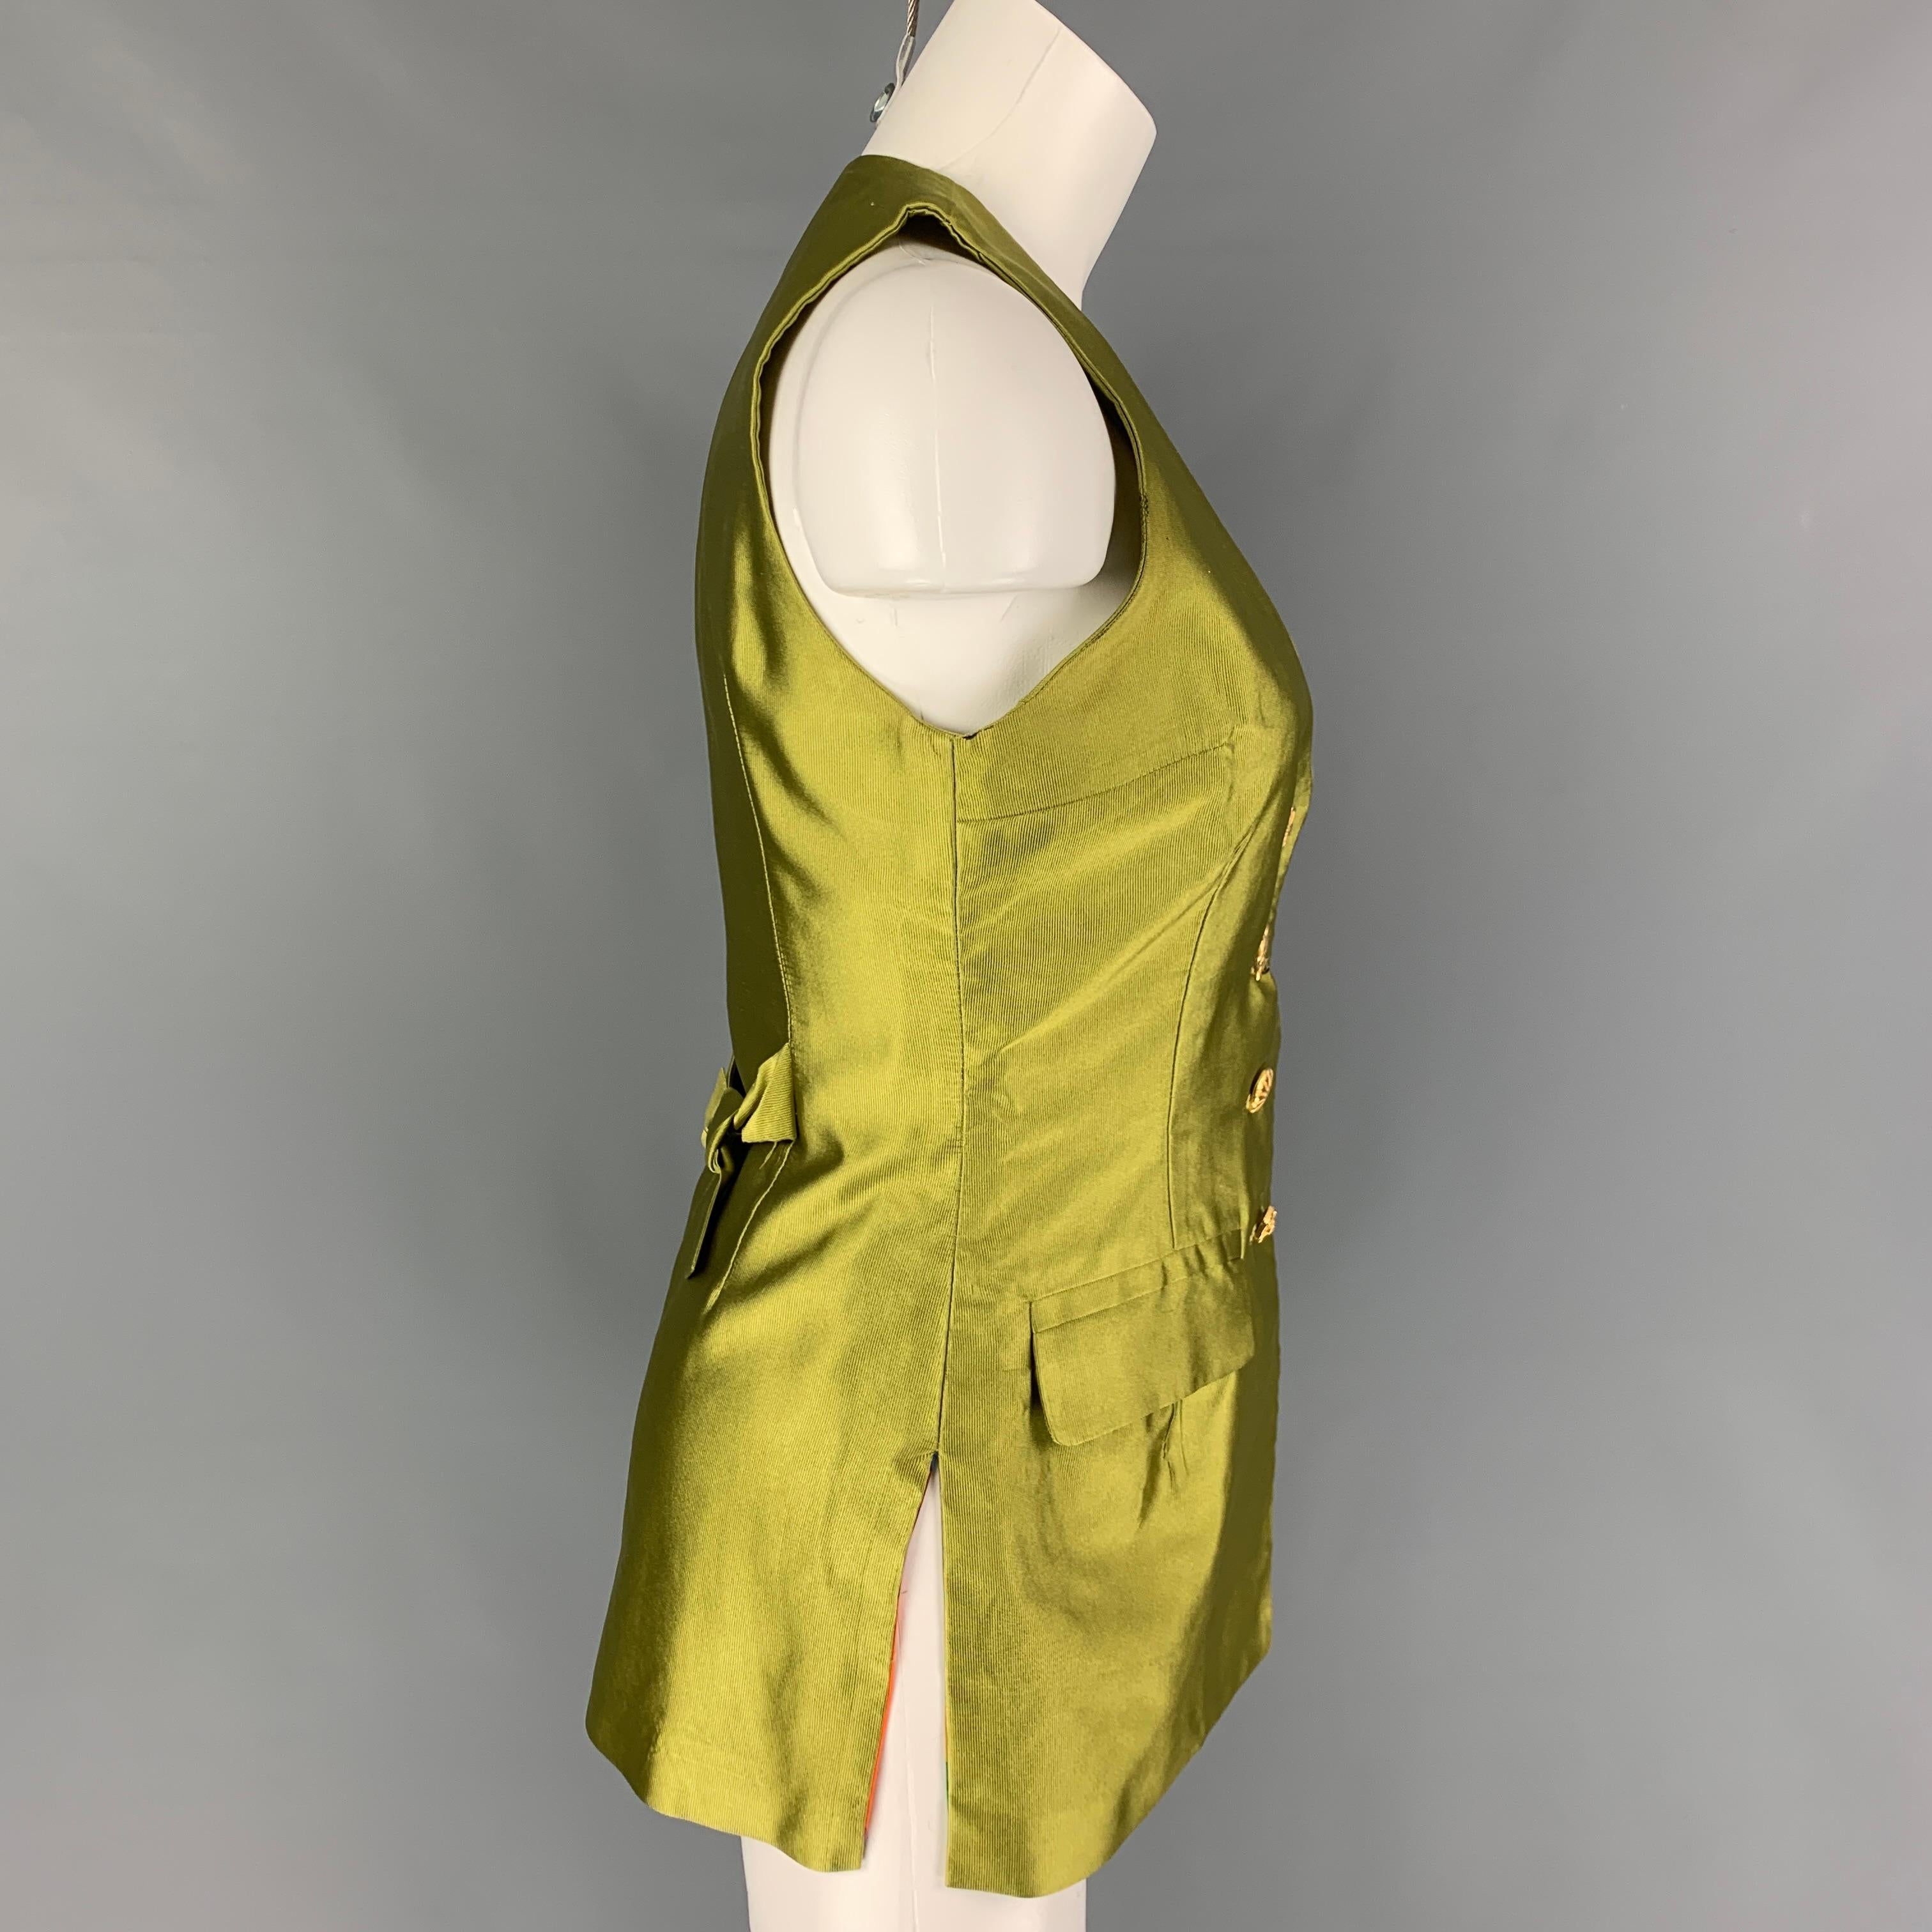 Vintage TODD OLDHAM Spring 1993 vest com a chartreuse twill silk featuring a back self-tie detail, flap pockets, and gold tone buttons. Made in USA. 

Very Good Pre-Owned Condition.
Marked: S

Measurements:

Shoulder: 10.25 in.
Bust: 32 in.
Length: